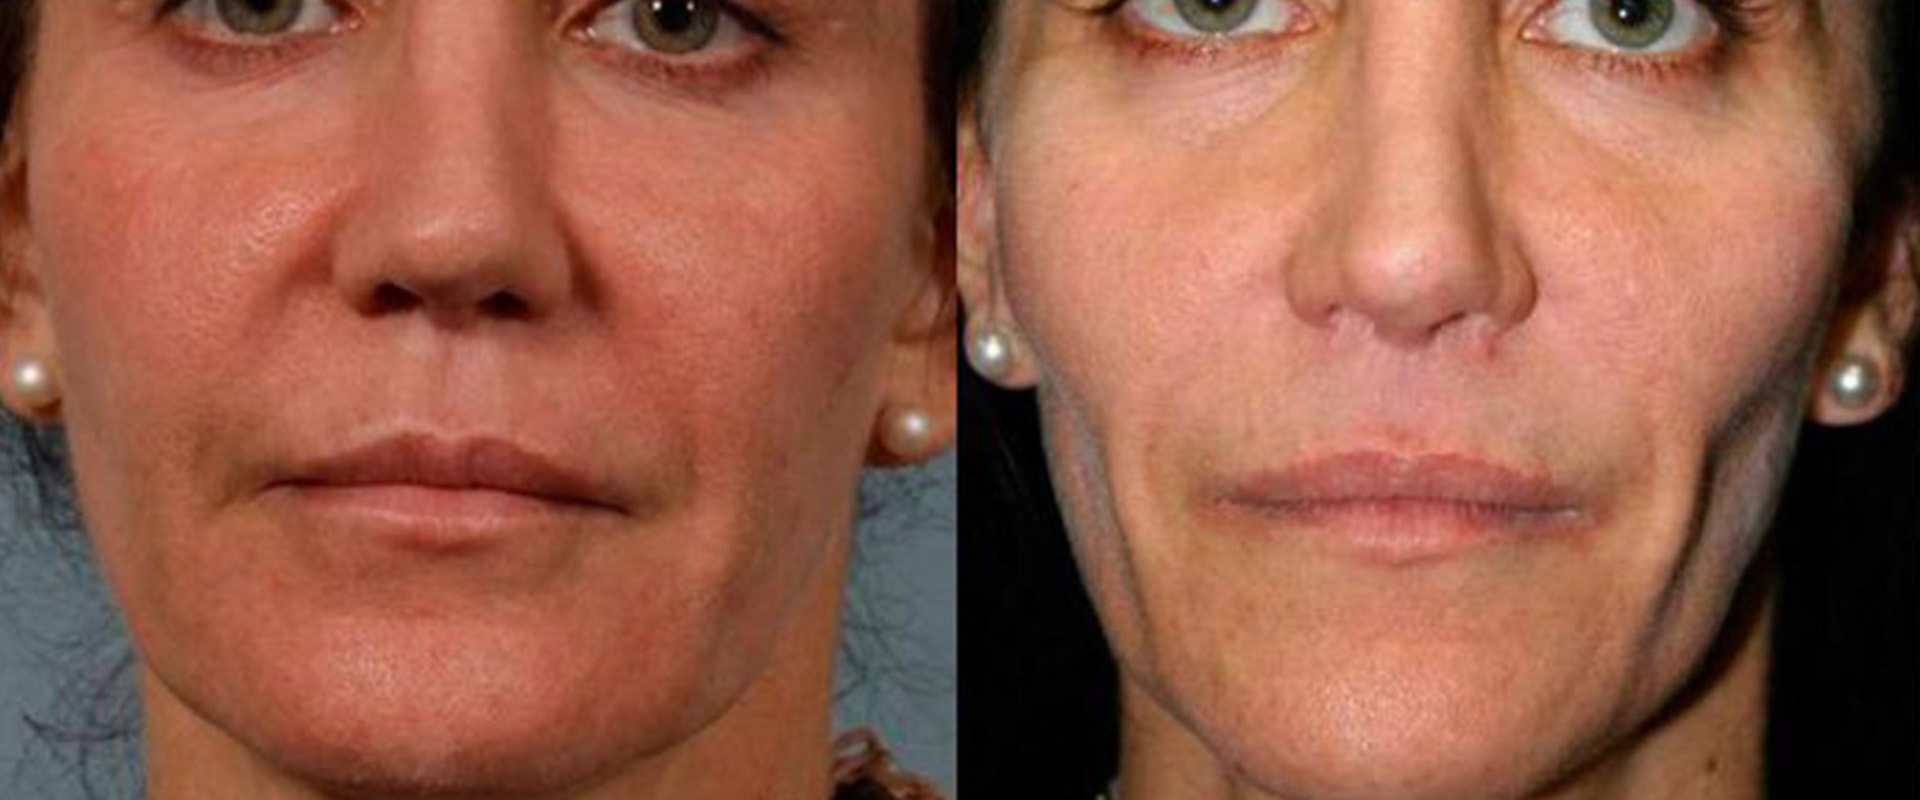 How Long Do Fillers Last?